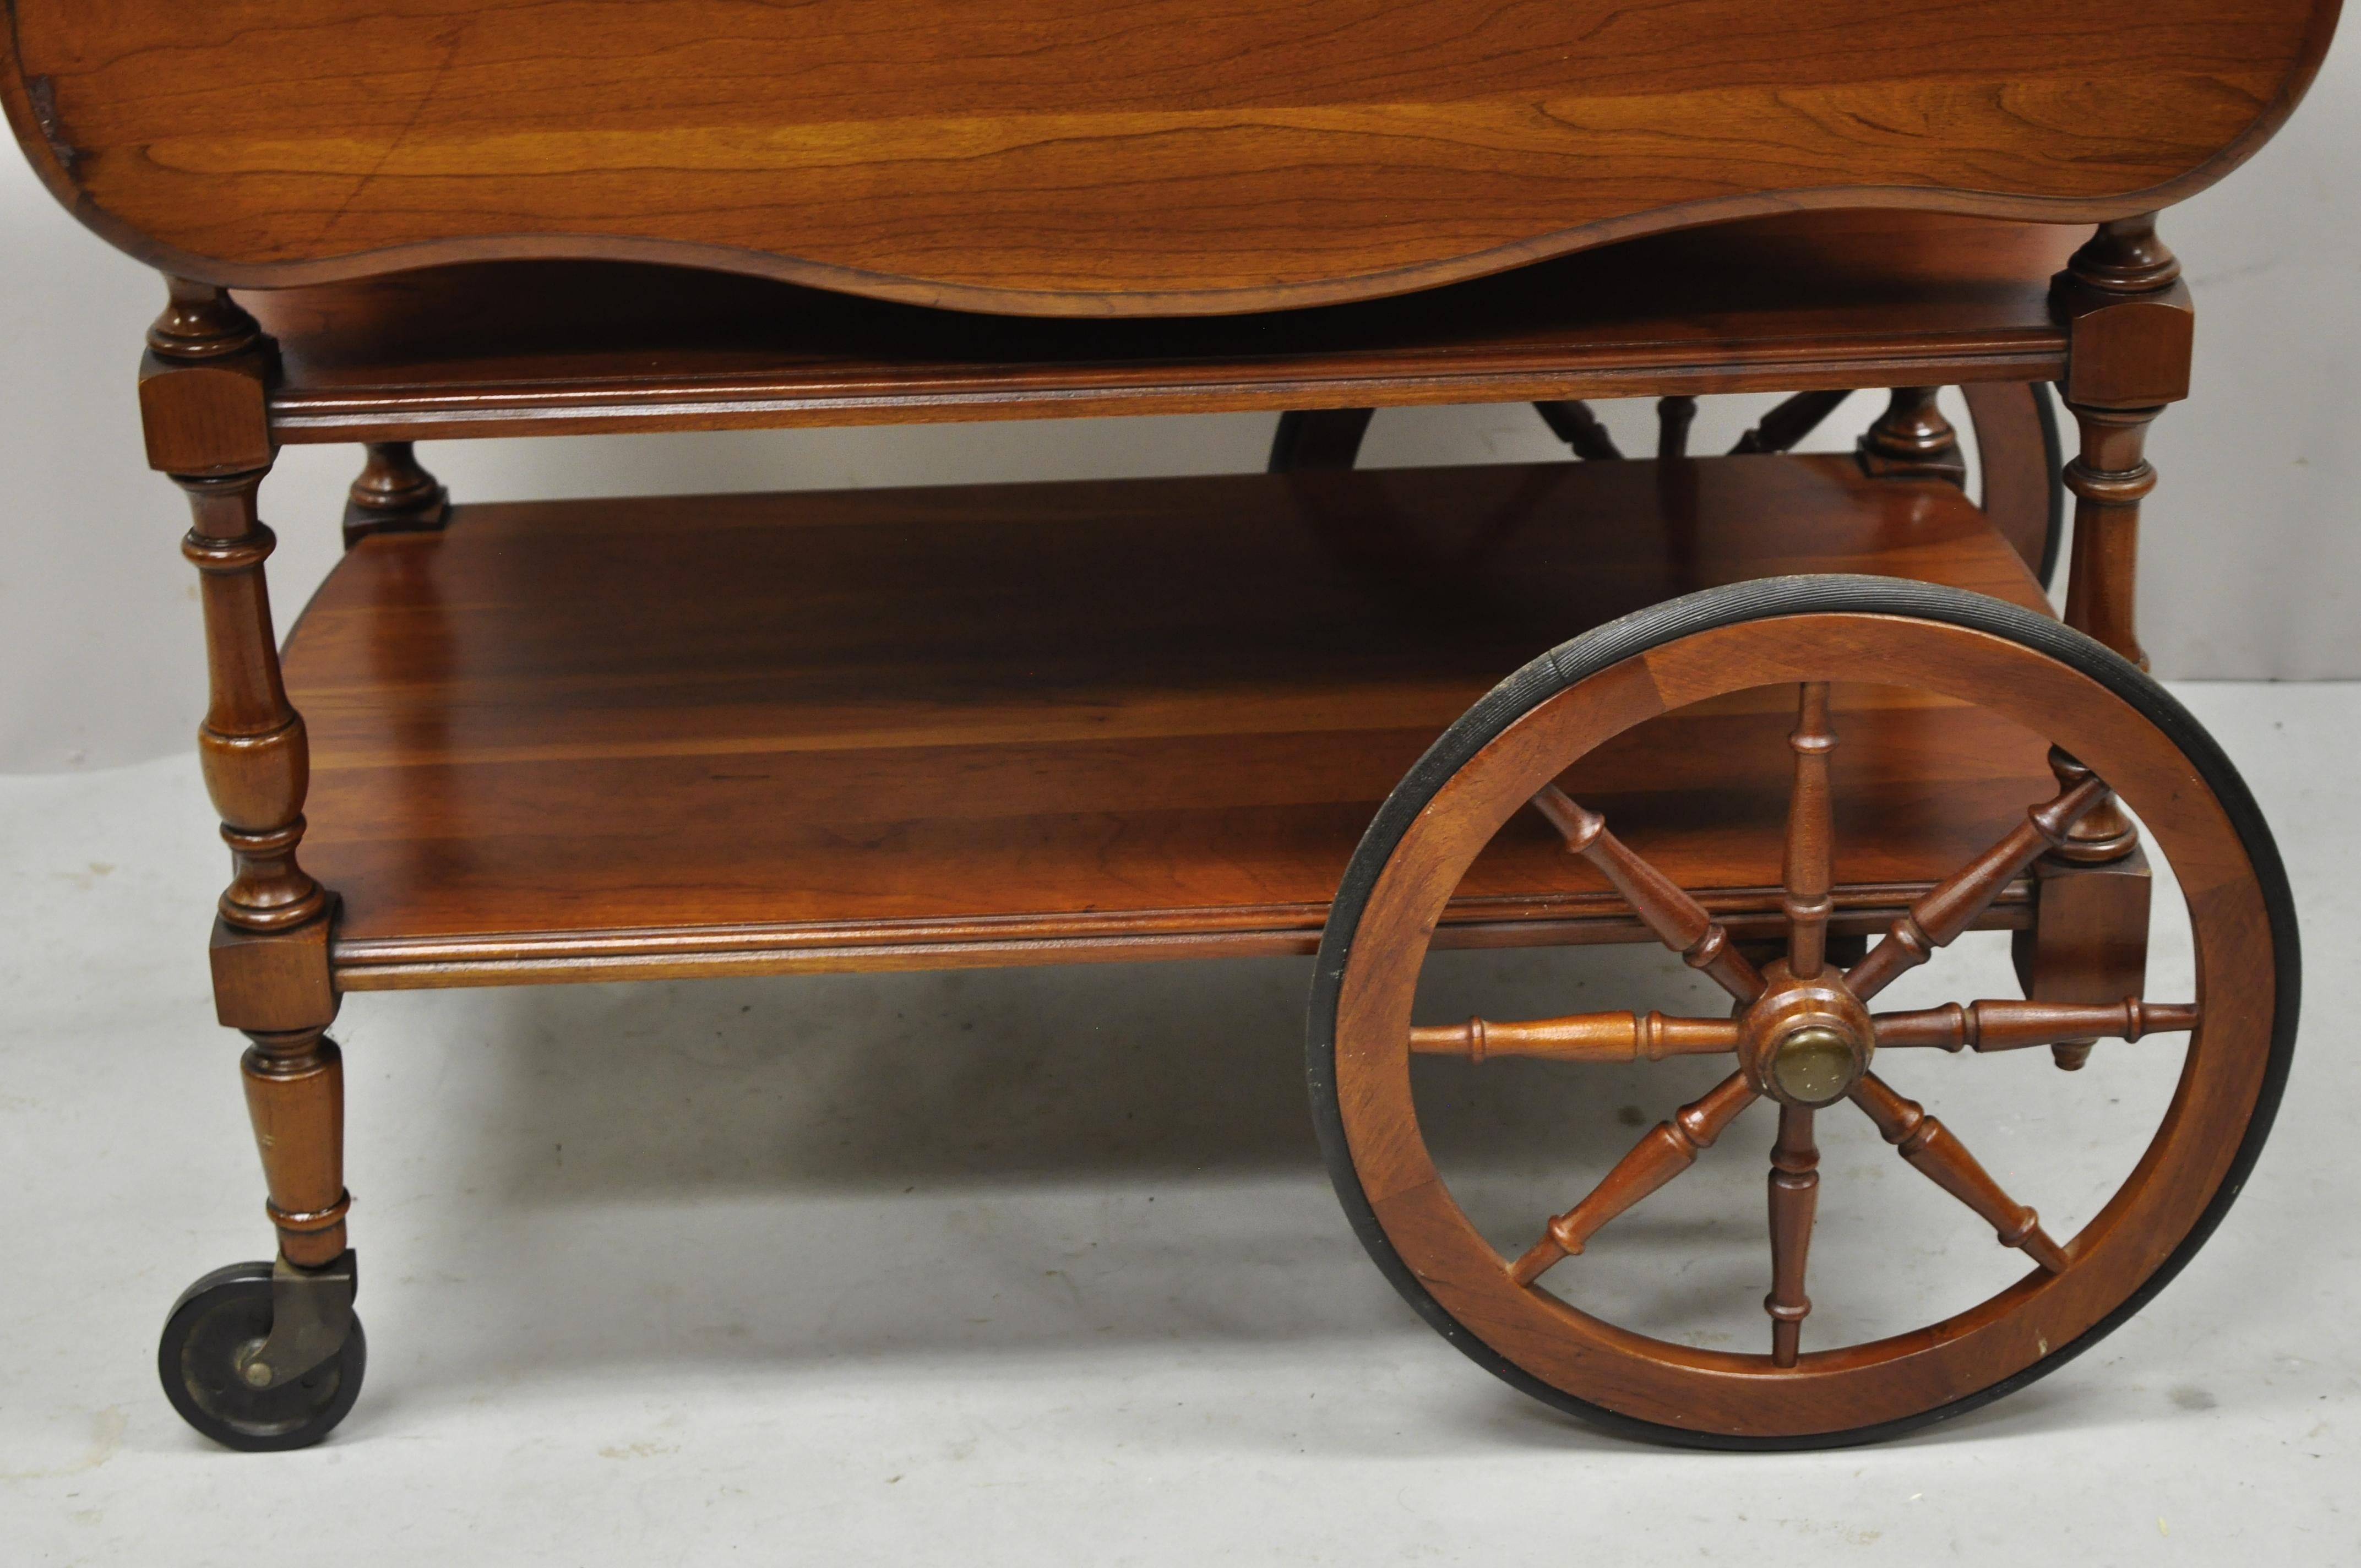 British Colonial Pennsylvania House Cherry Wood Drop Leaf Rolling Tea Cart Server with Drawer